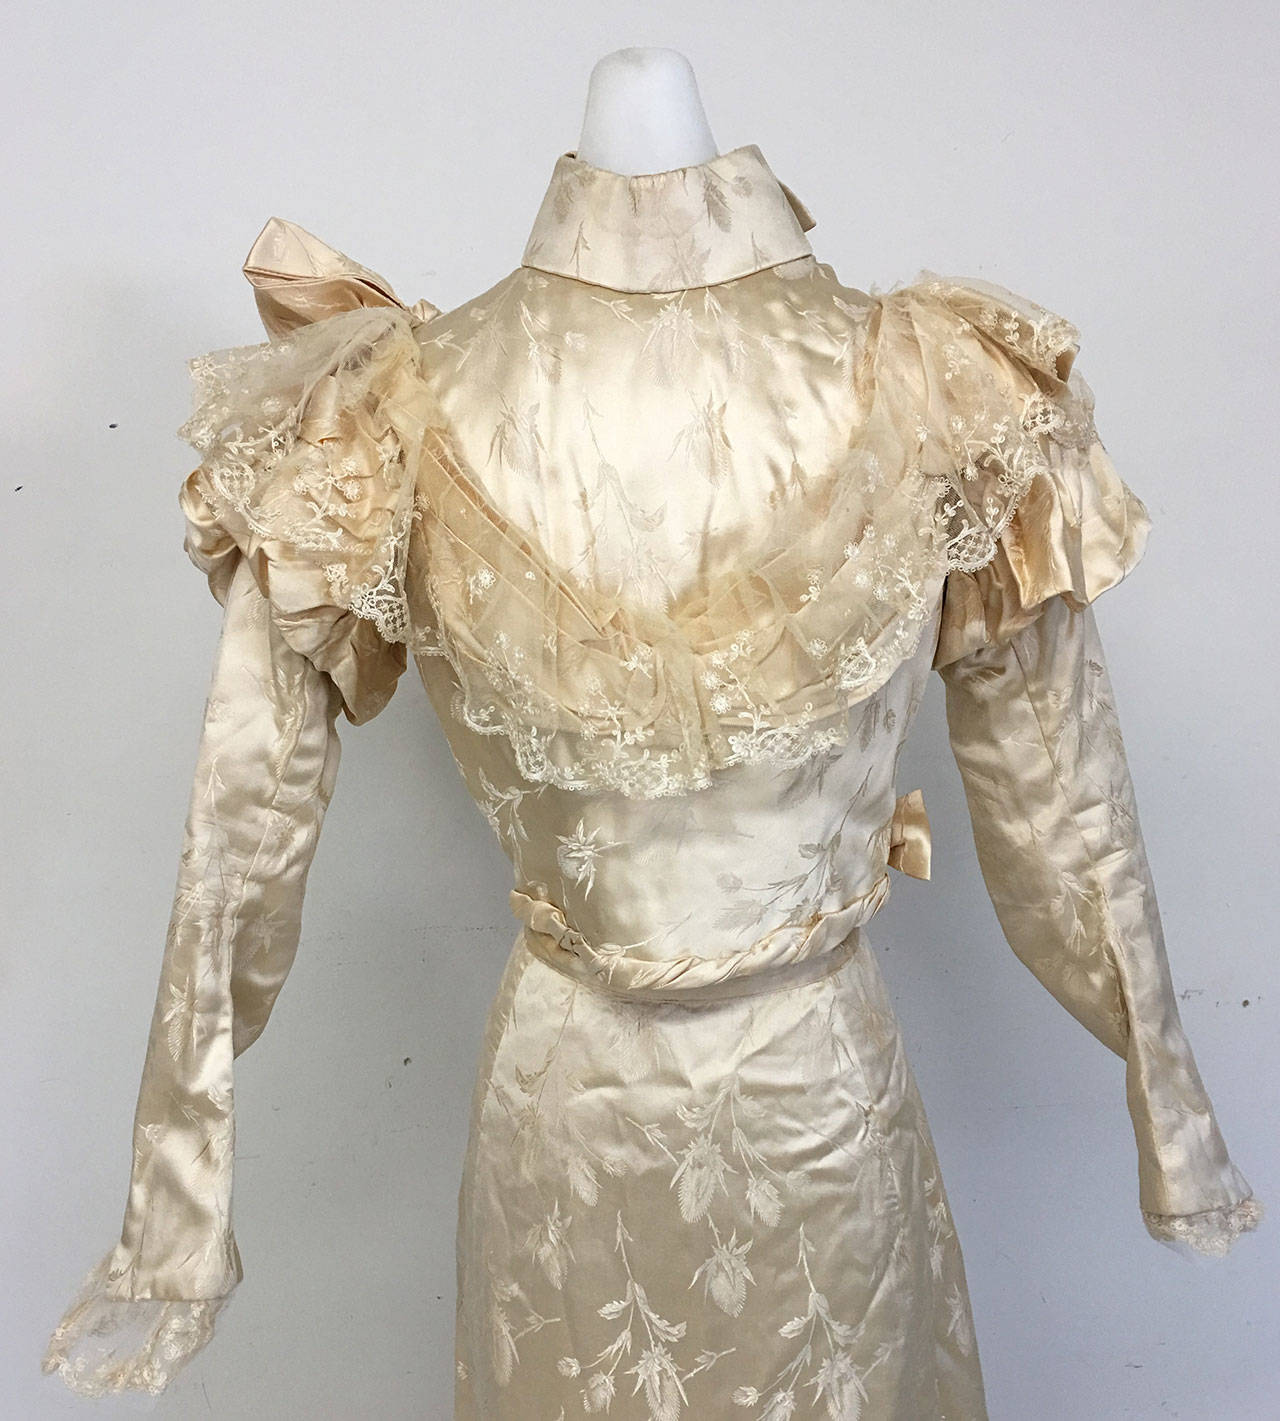 The Clallam County Historical Society’s “Celebrating 120 Years of Bridal Parties” features historic bridal gowns such as this gown from 1898 Photo courtesy of Clallam County Historical Society